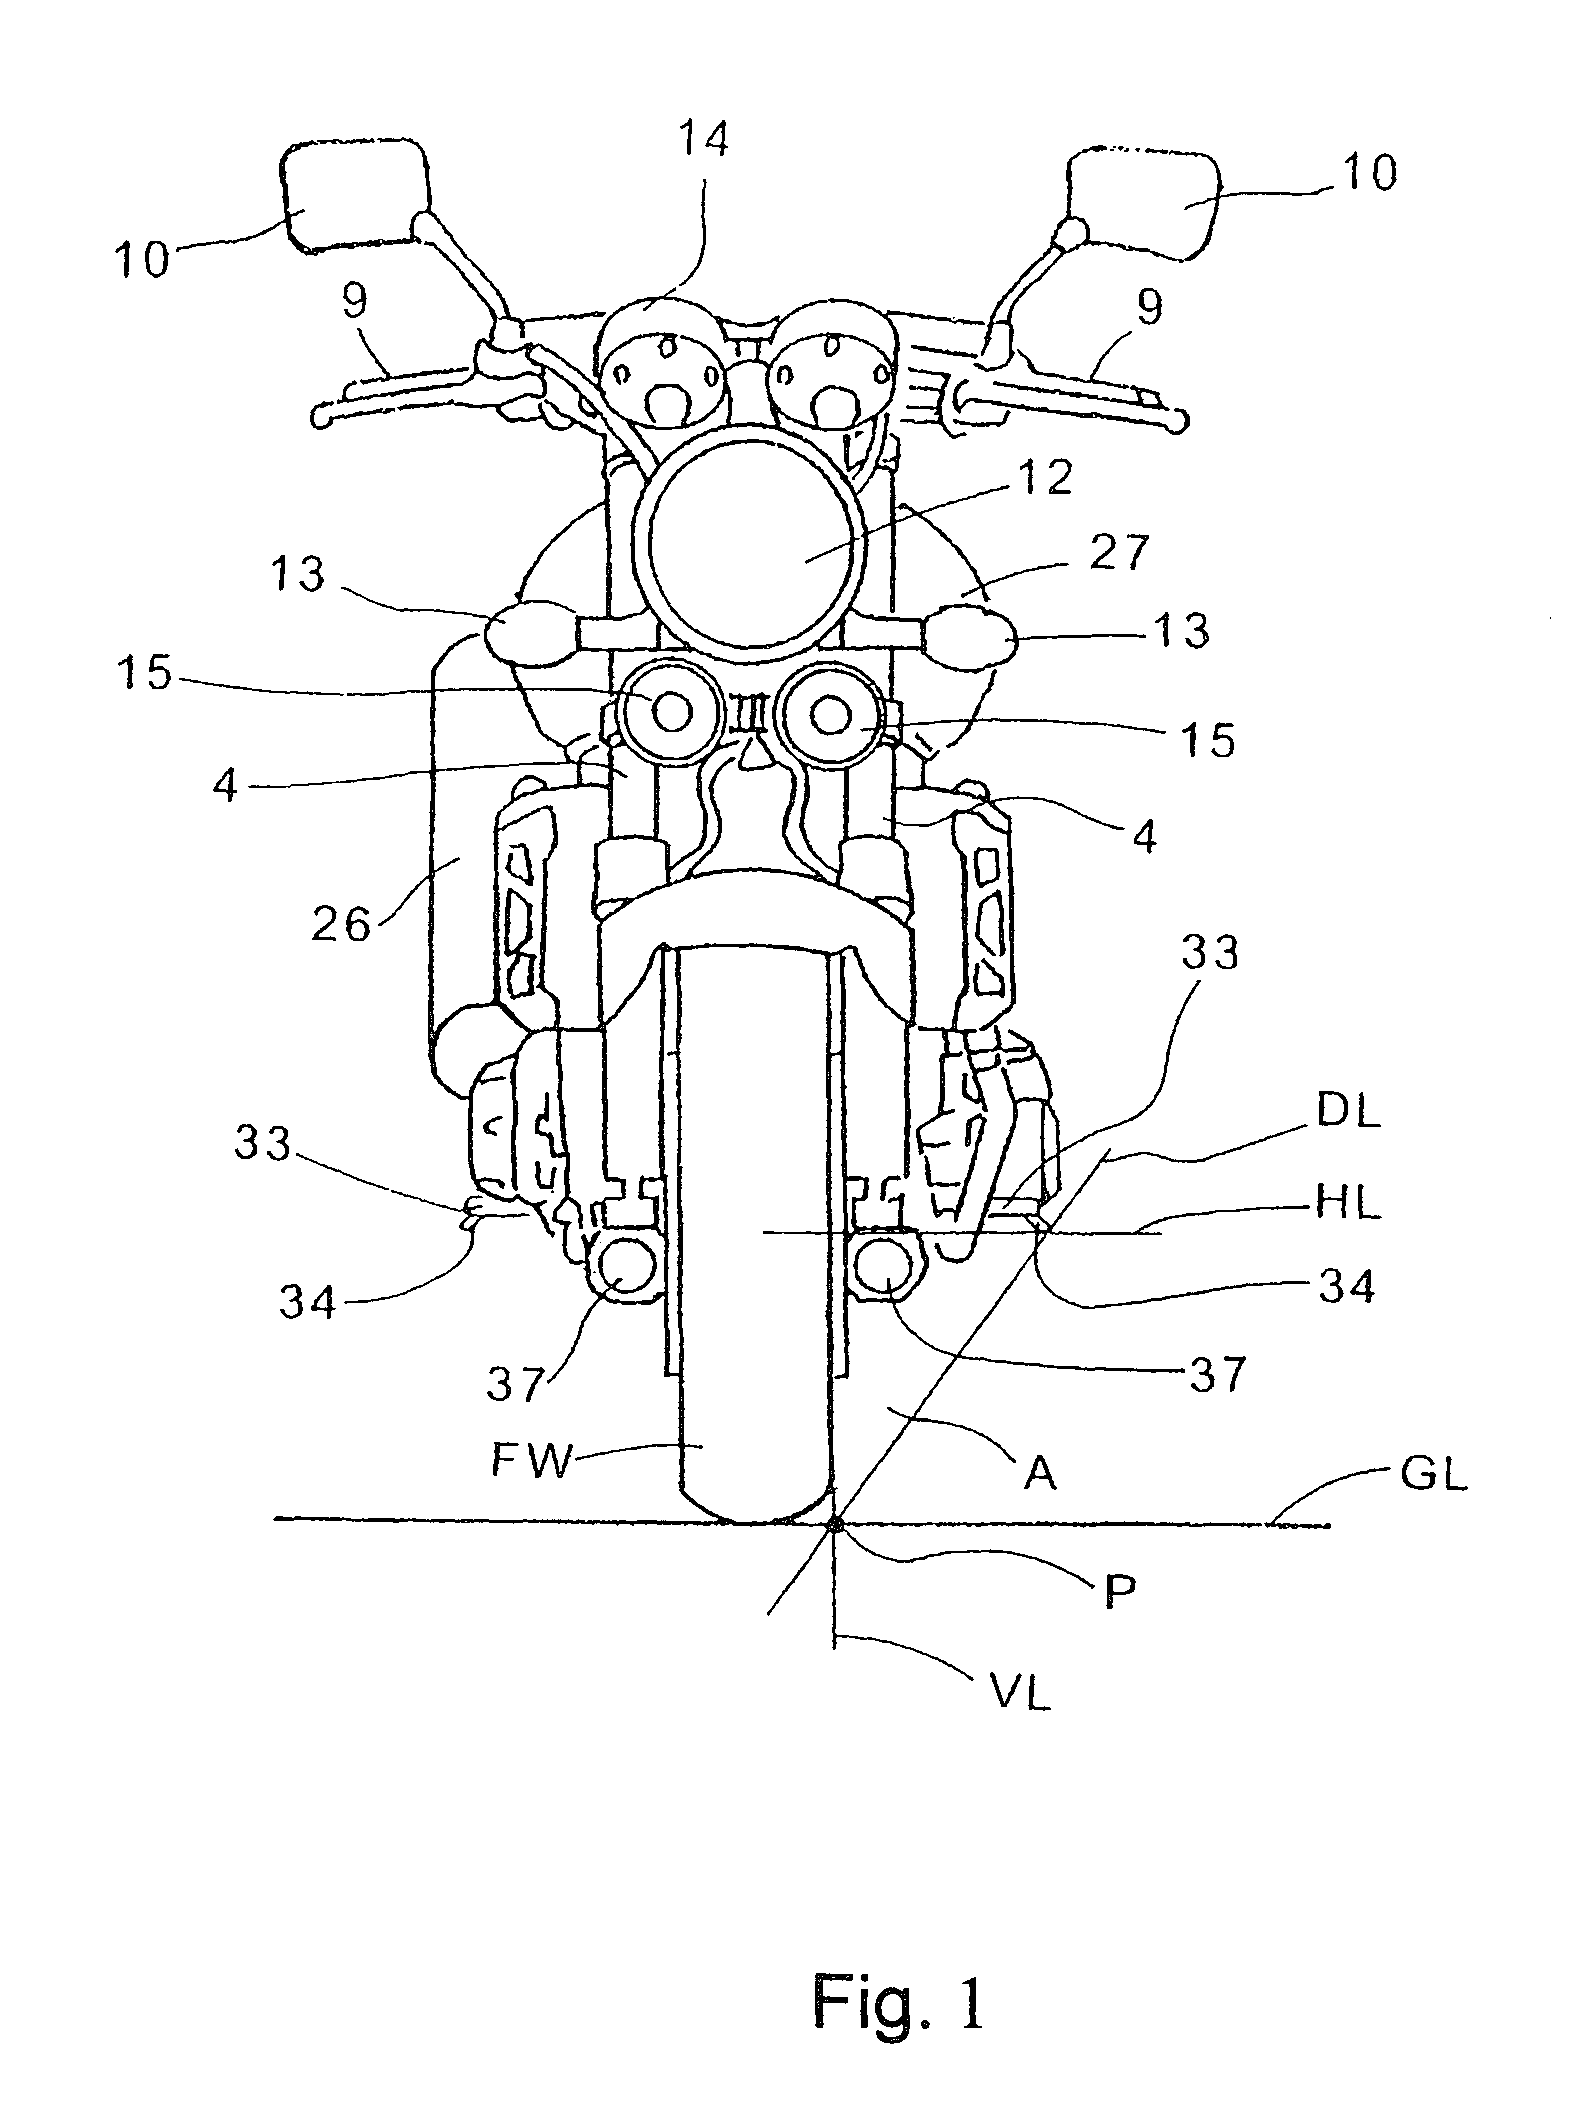 Lighting apparatus for motorcycle